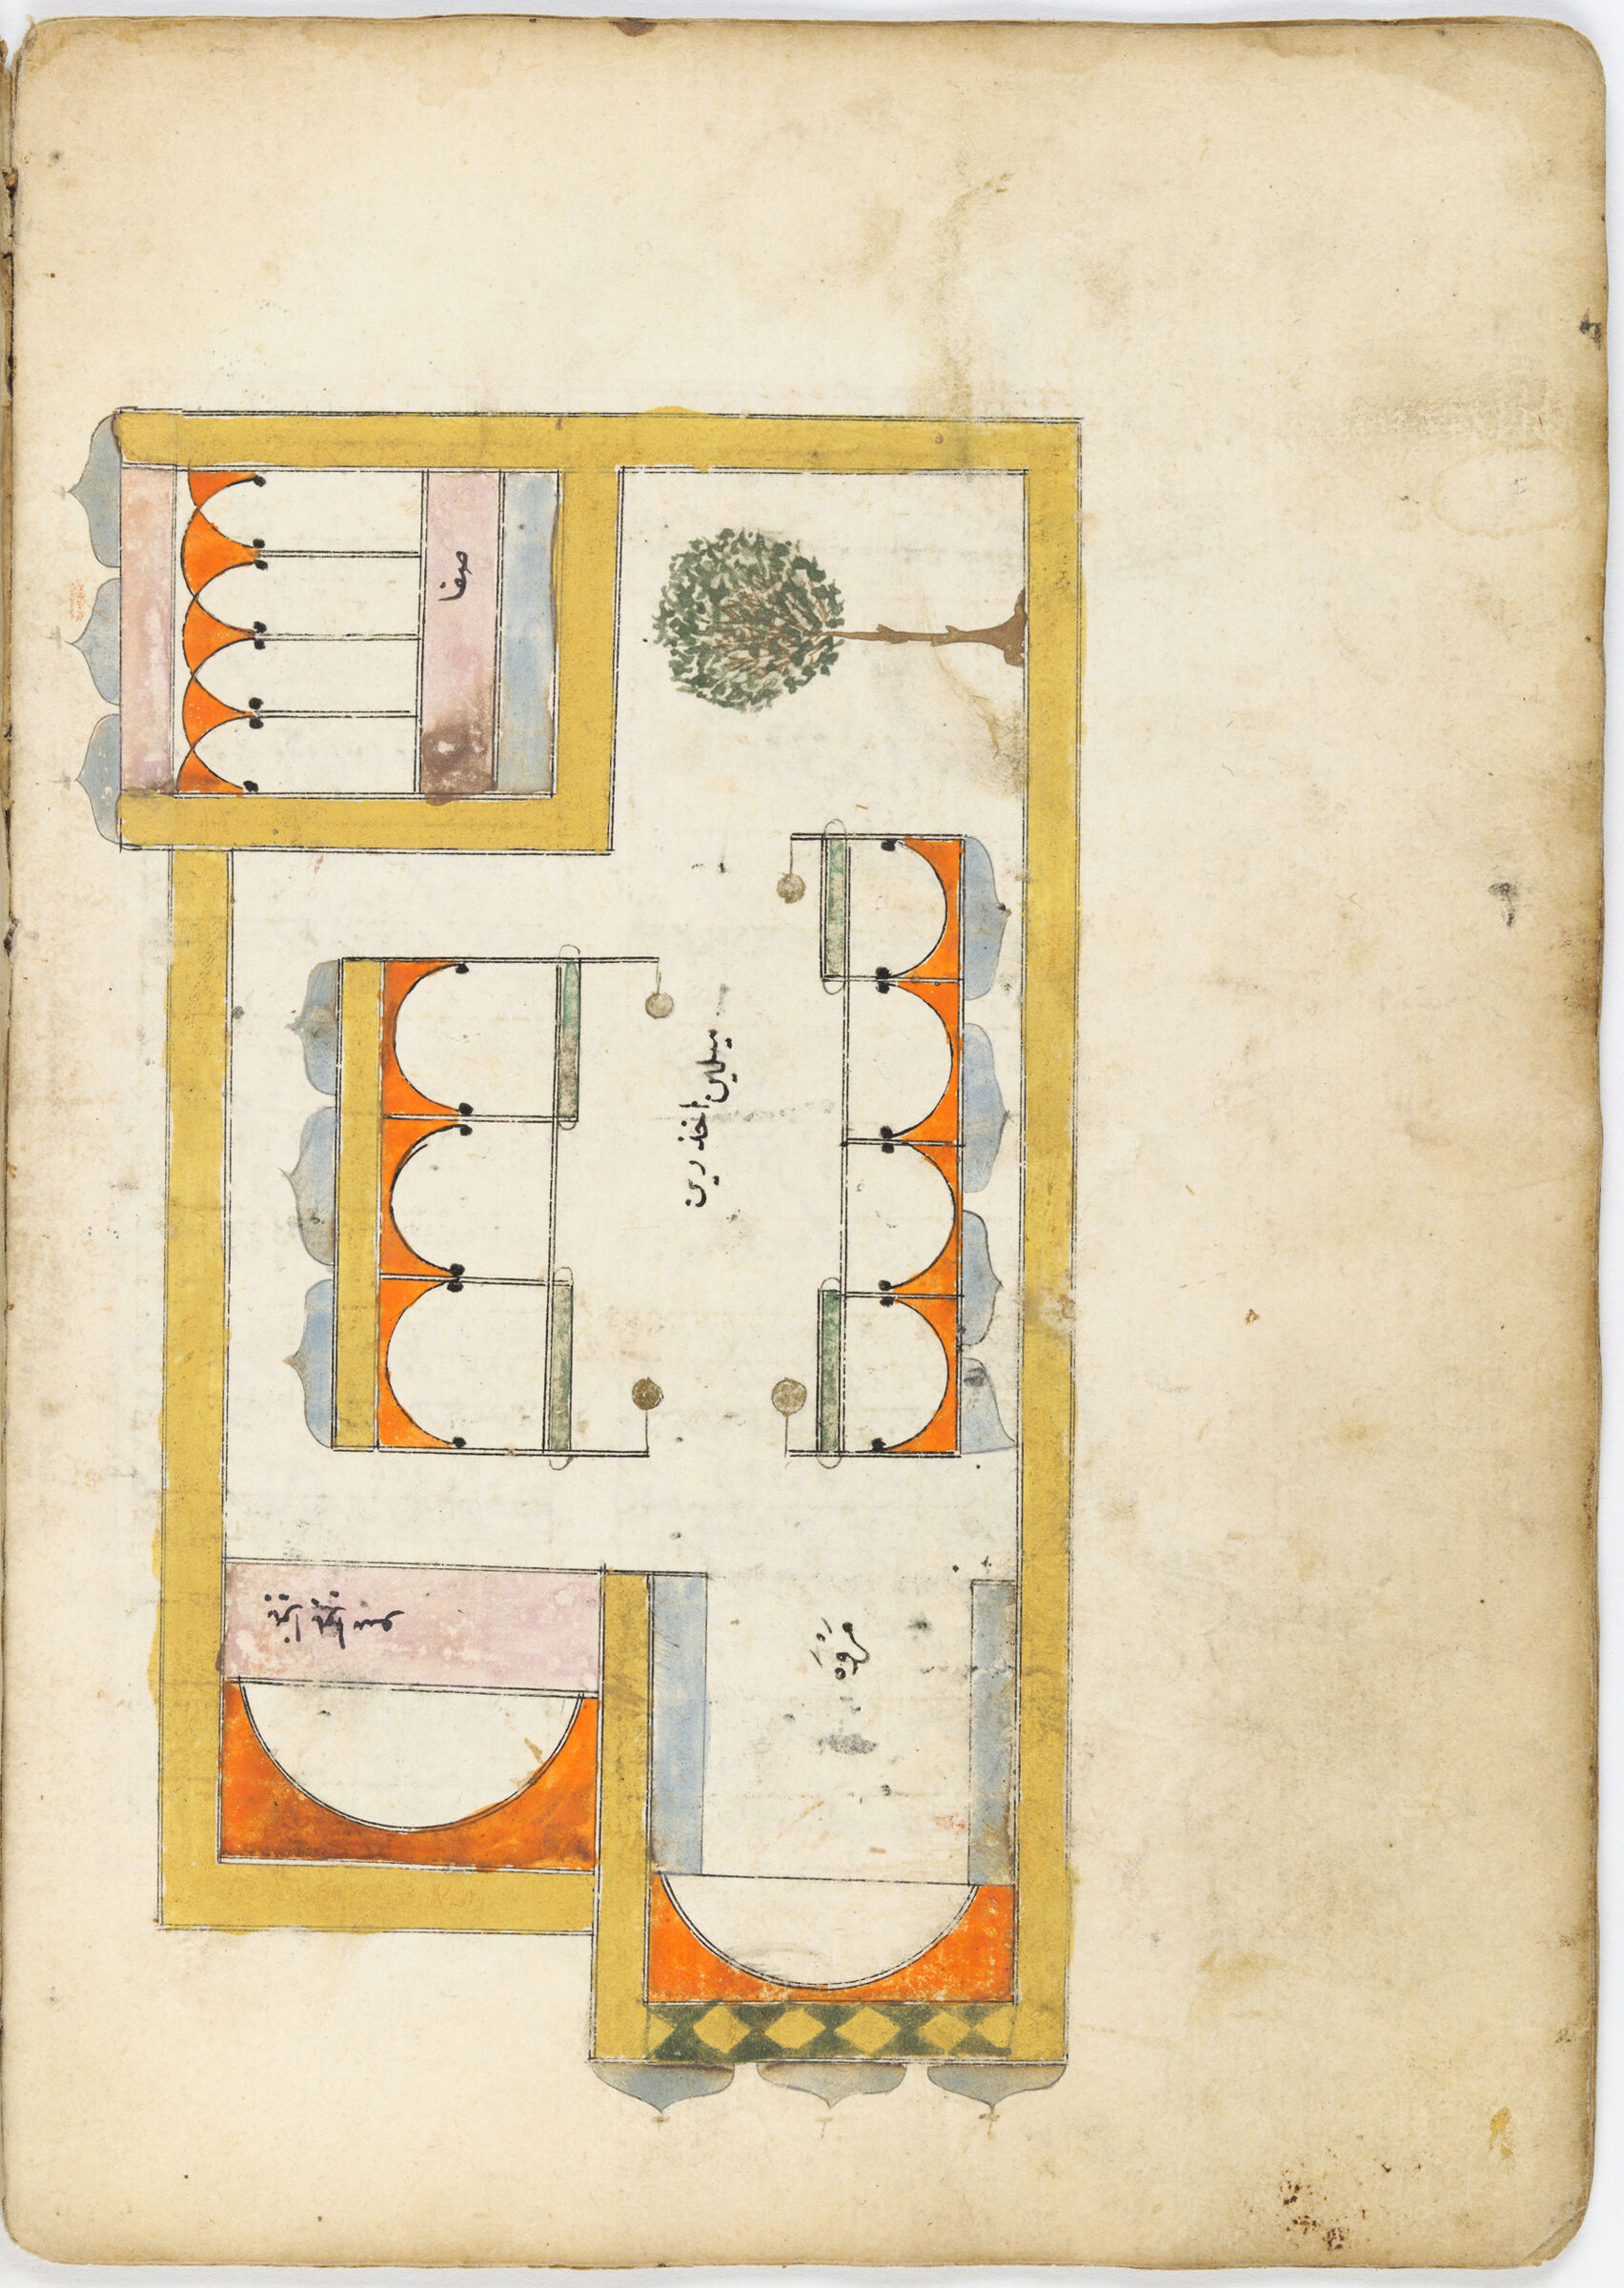 Painting, Verso; Text, Recto Of  Folio 9, Illustrated Folio From A Manuscript Of The Kitab-I Mihasikü’l-Hacc By Mevlana Jami